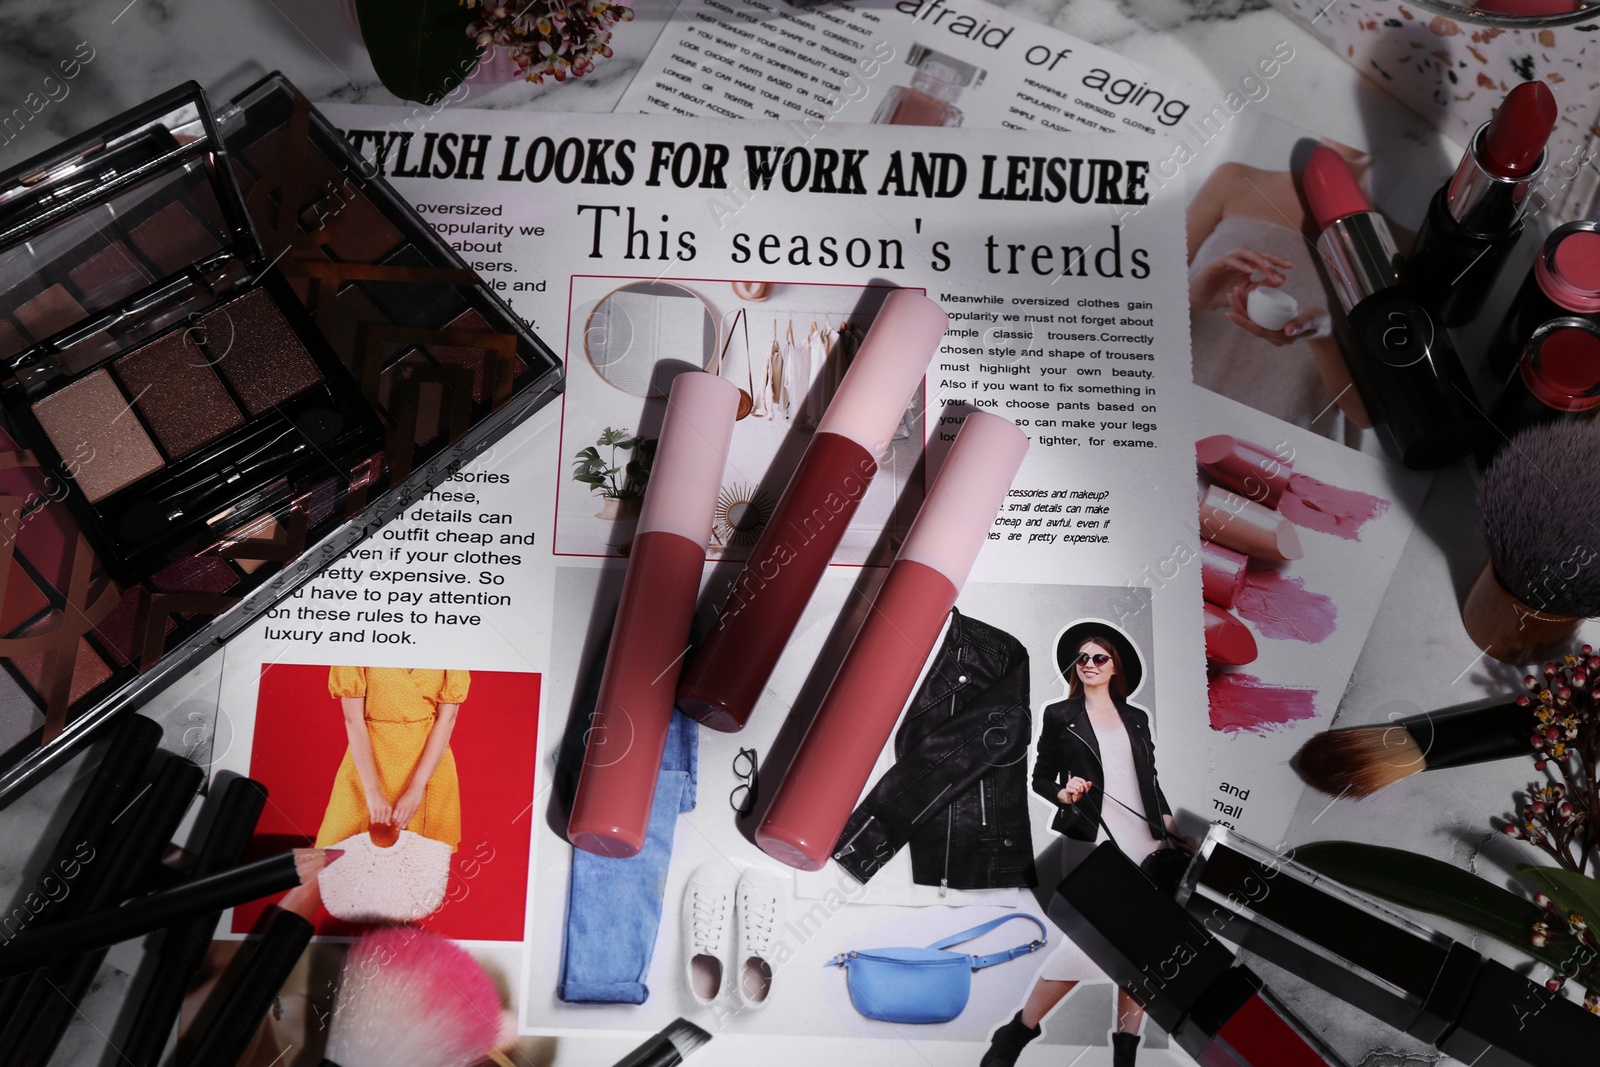 Photo of Bright lip glosses among different cosmetic products and fashion magazine on table, flat lay